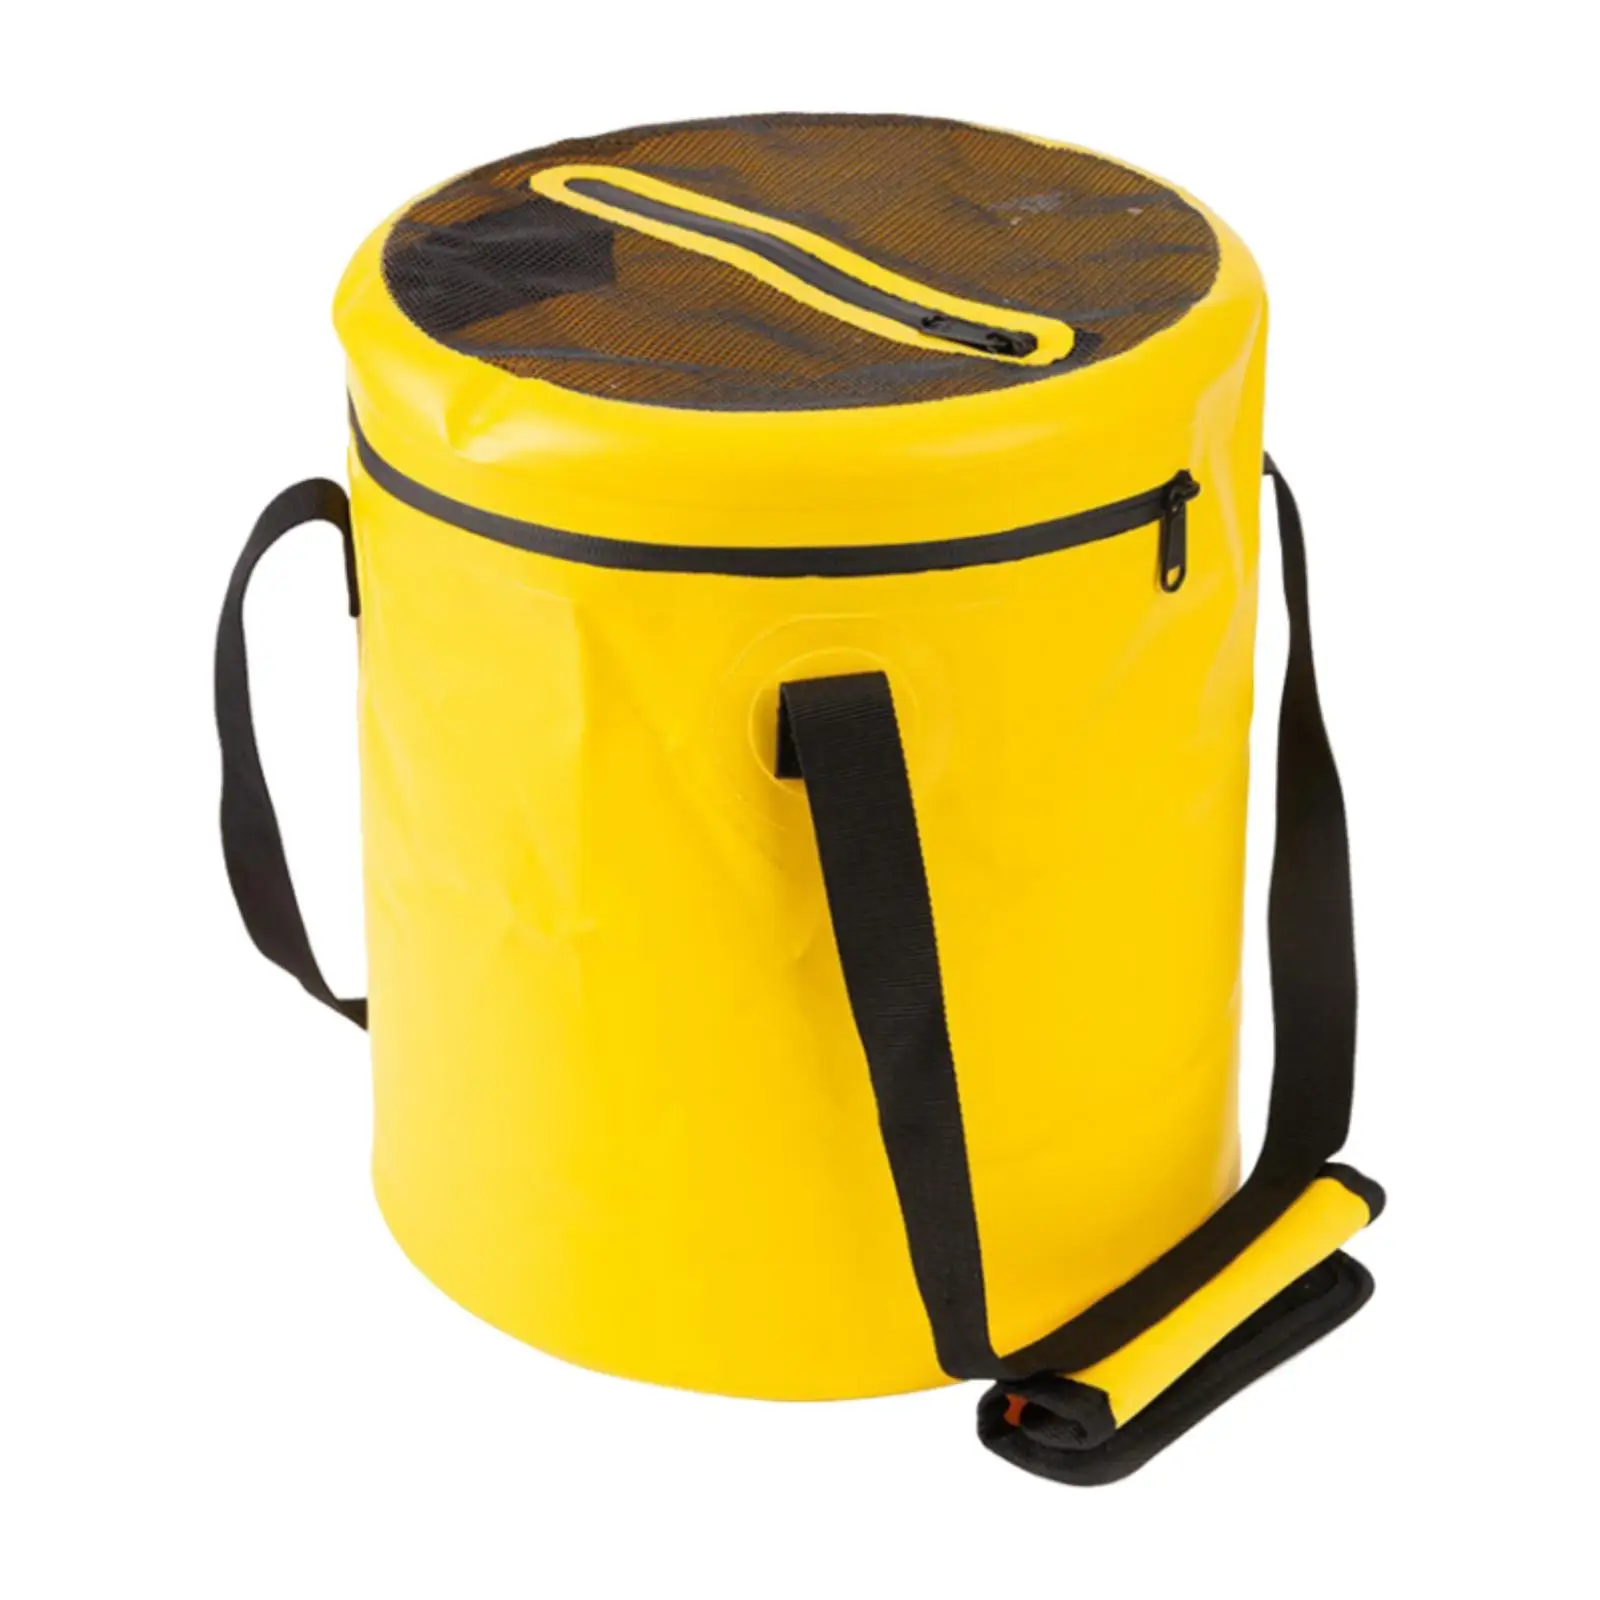 Collapsible Bucket with Lid with Lid with Handle Portable Wash Basin Folding Bucket for Camping Gardening Boating Picnic Fishing